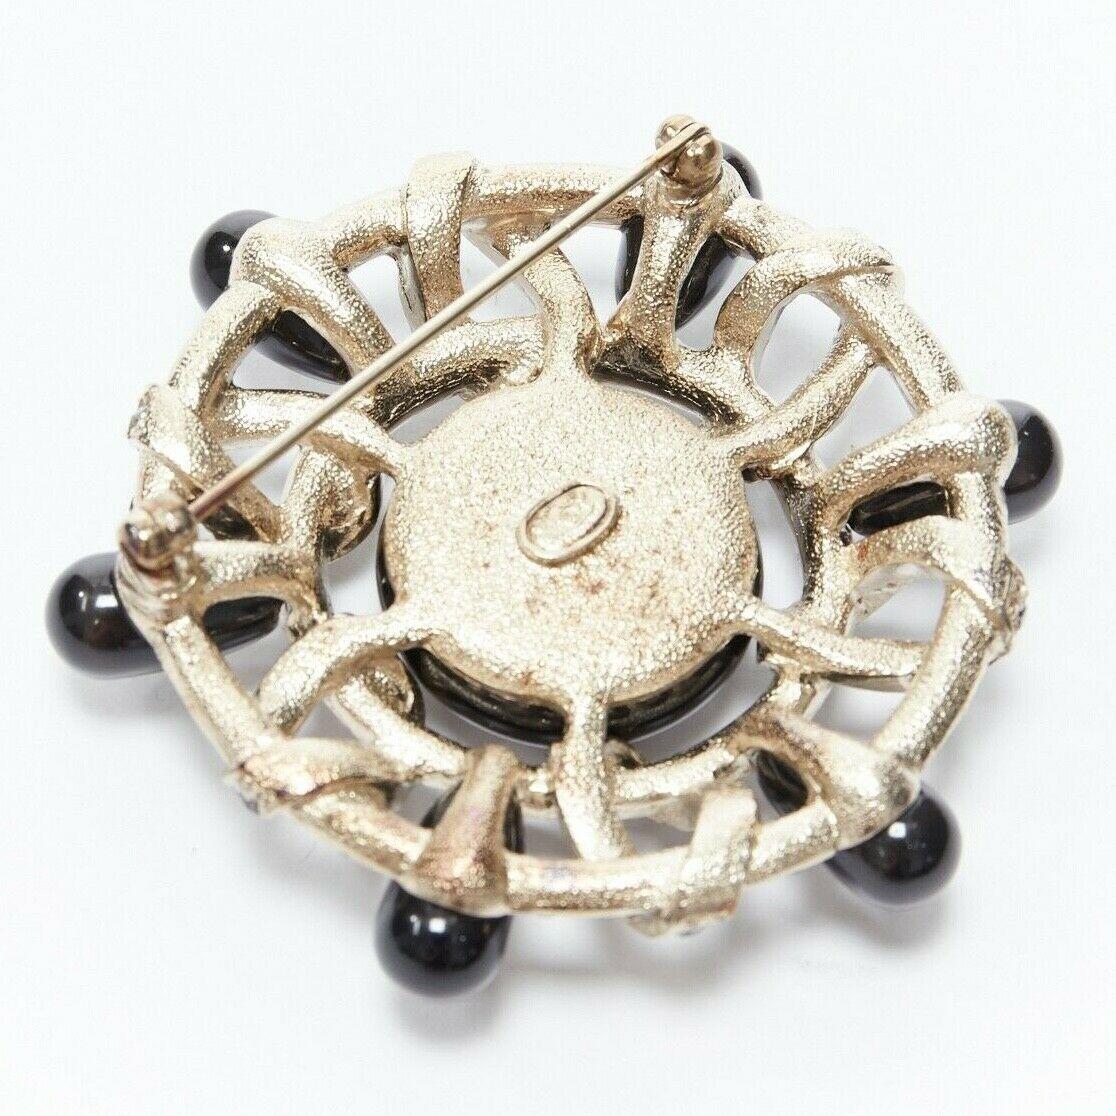 Women's new CHANEL KARL LAGERFELD black stone strass crystal embellished CC pin brooch